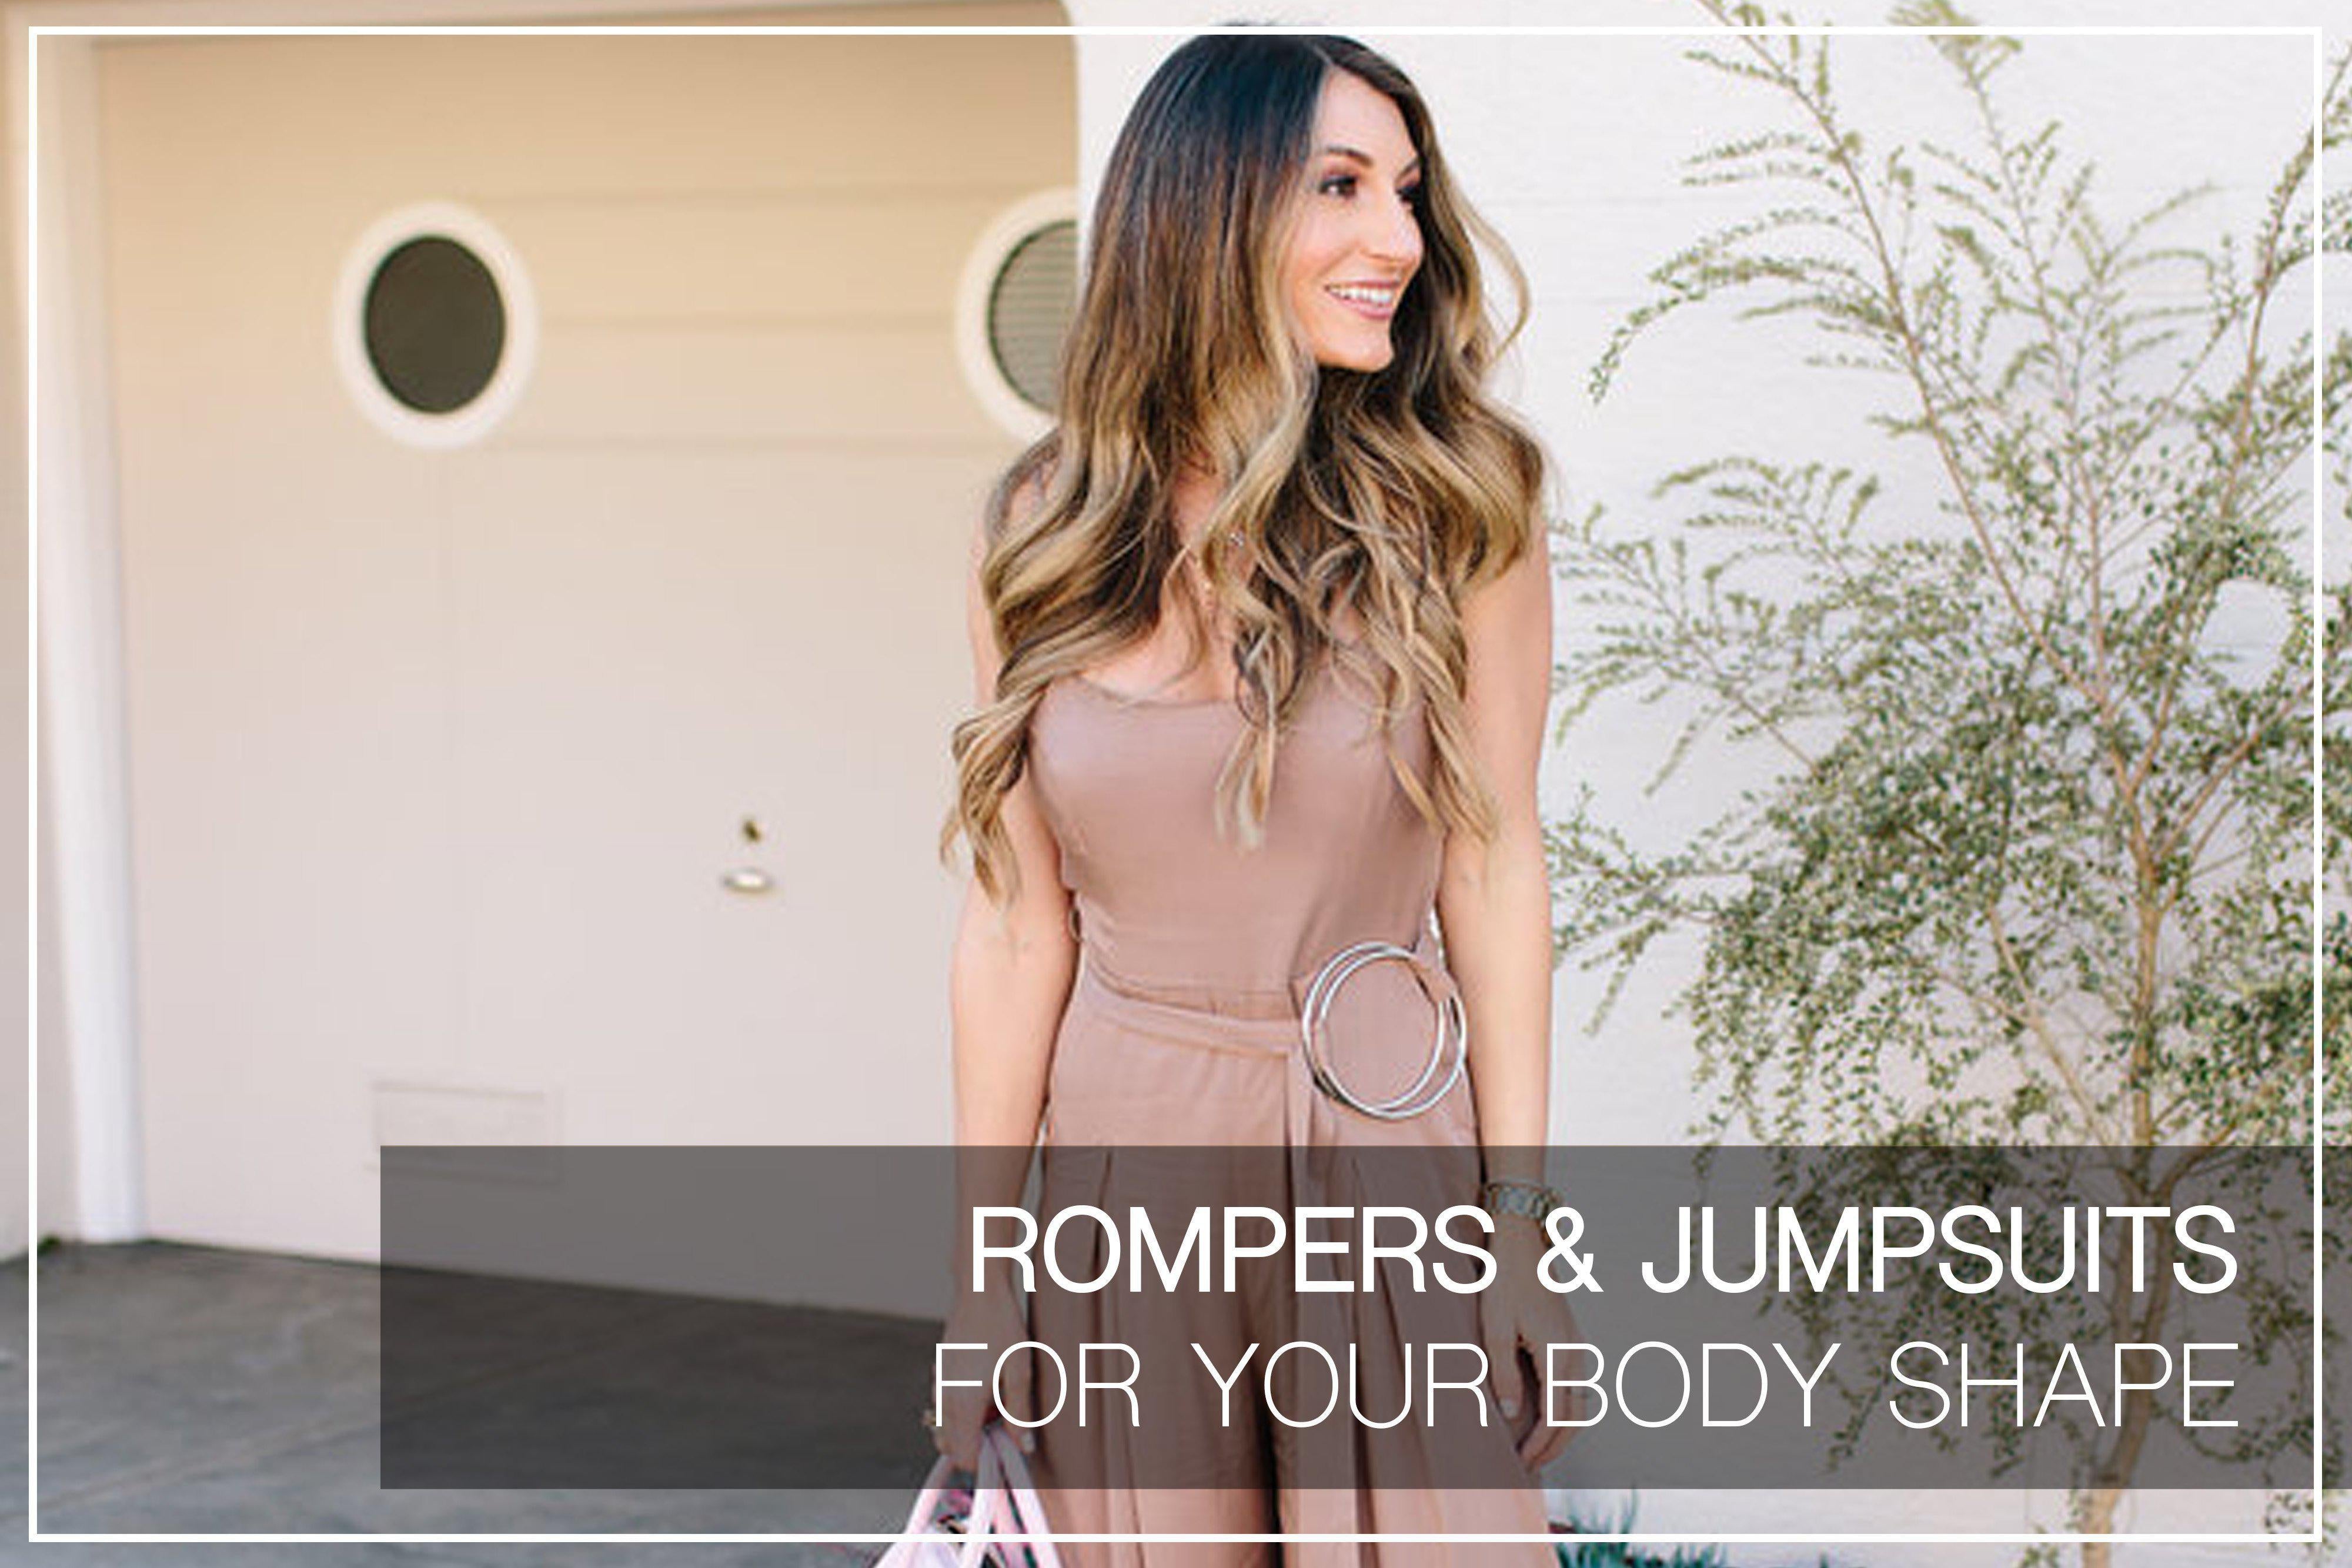 shop for rompers jumpsuits that look good on your body type